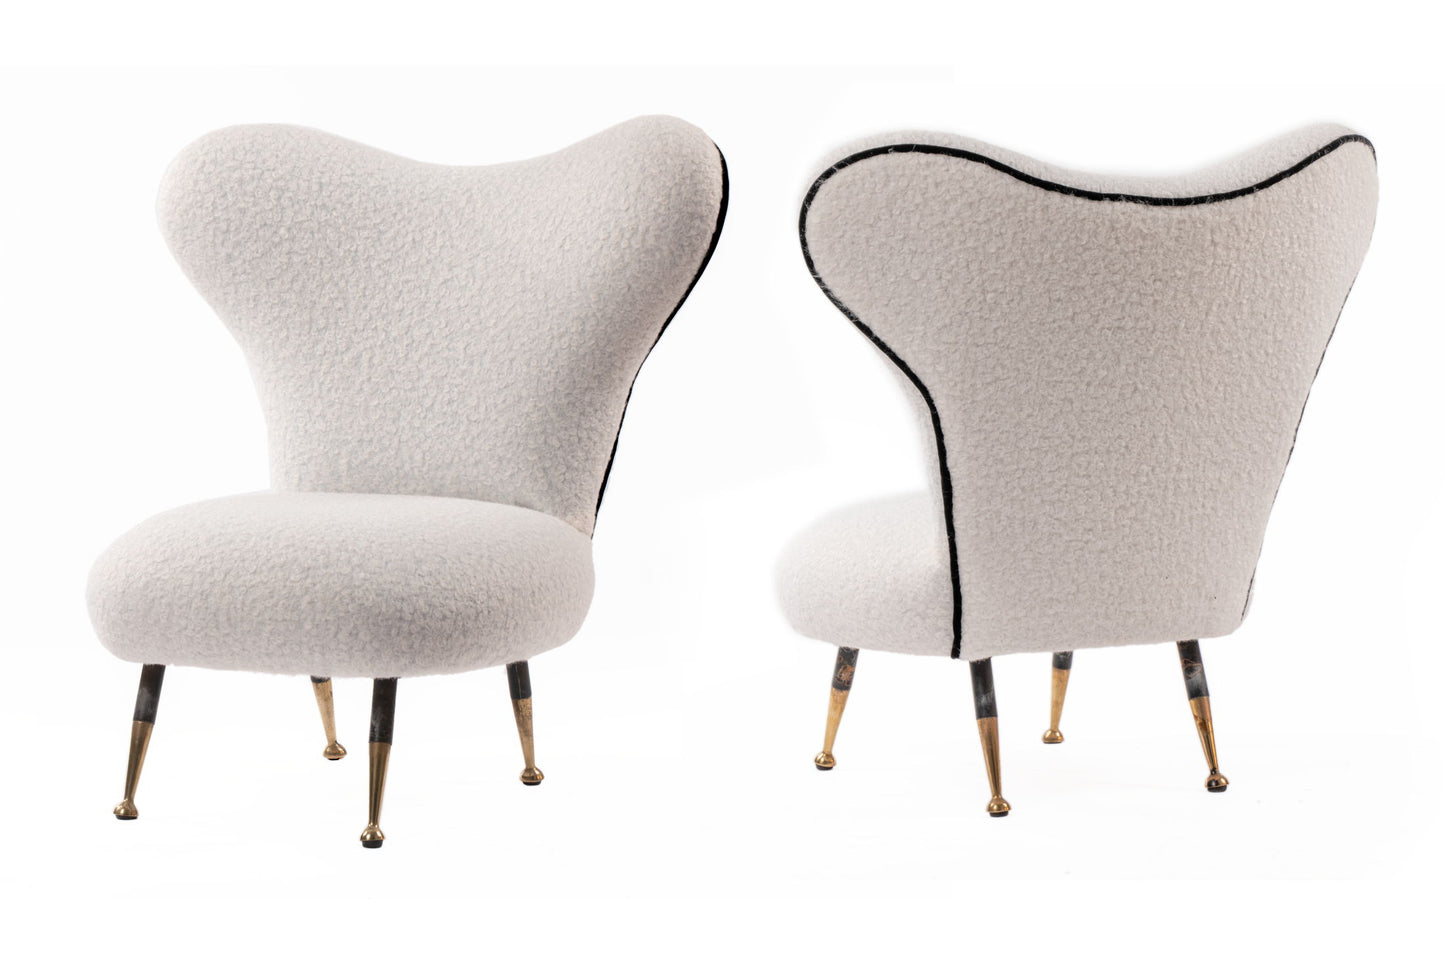 Pair of white bouclé bedroom armchairs from the 60s